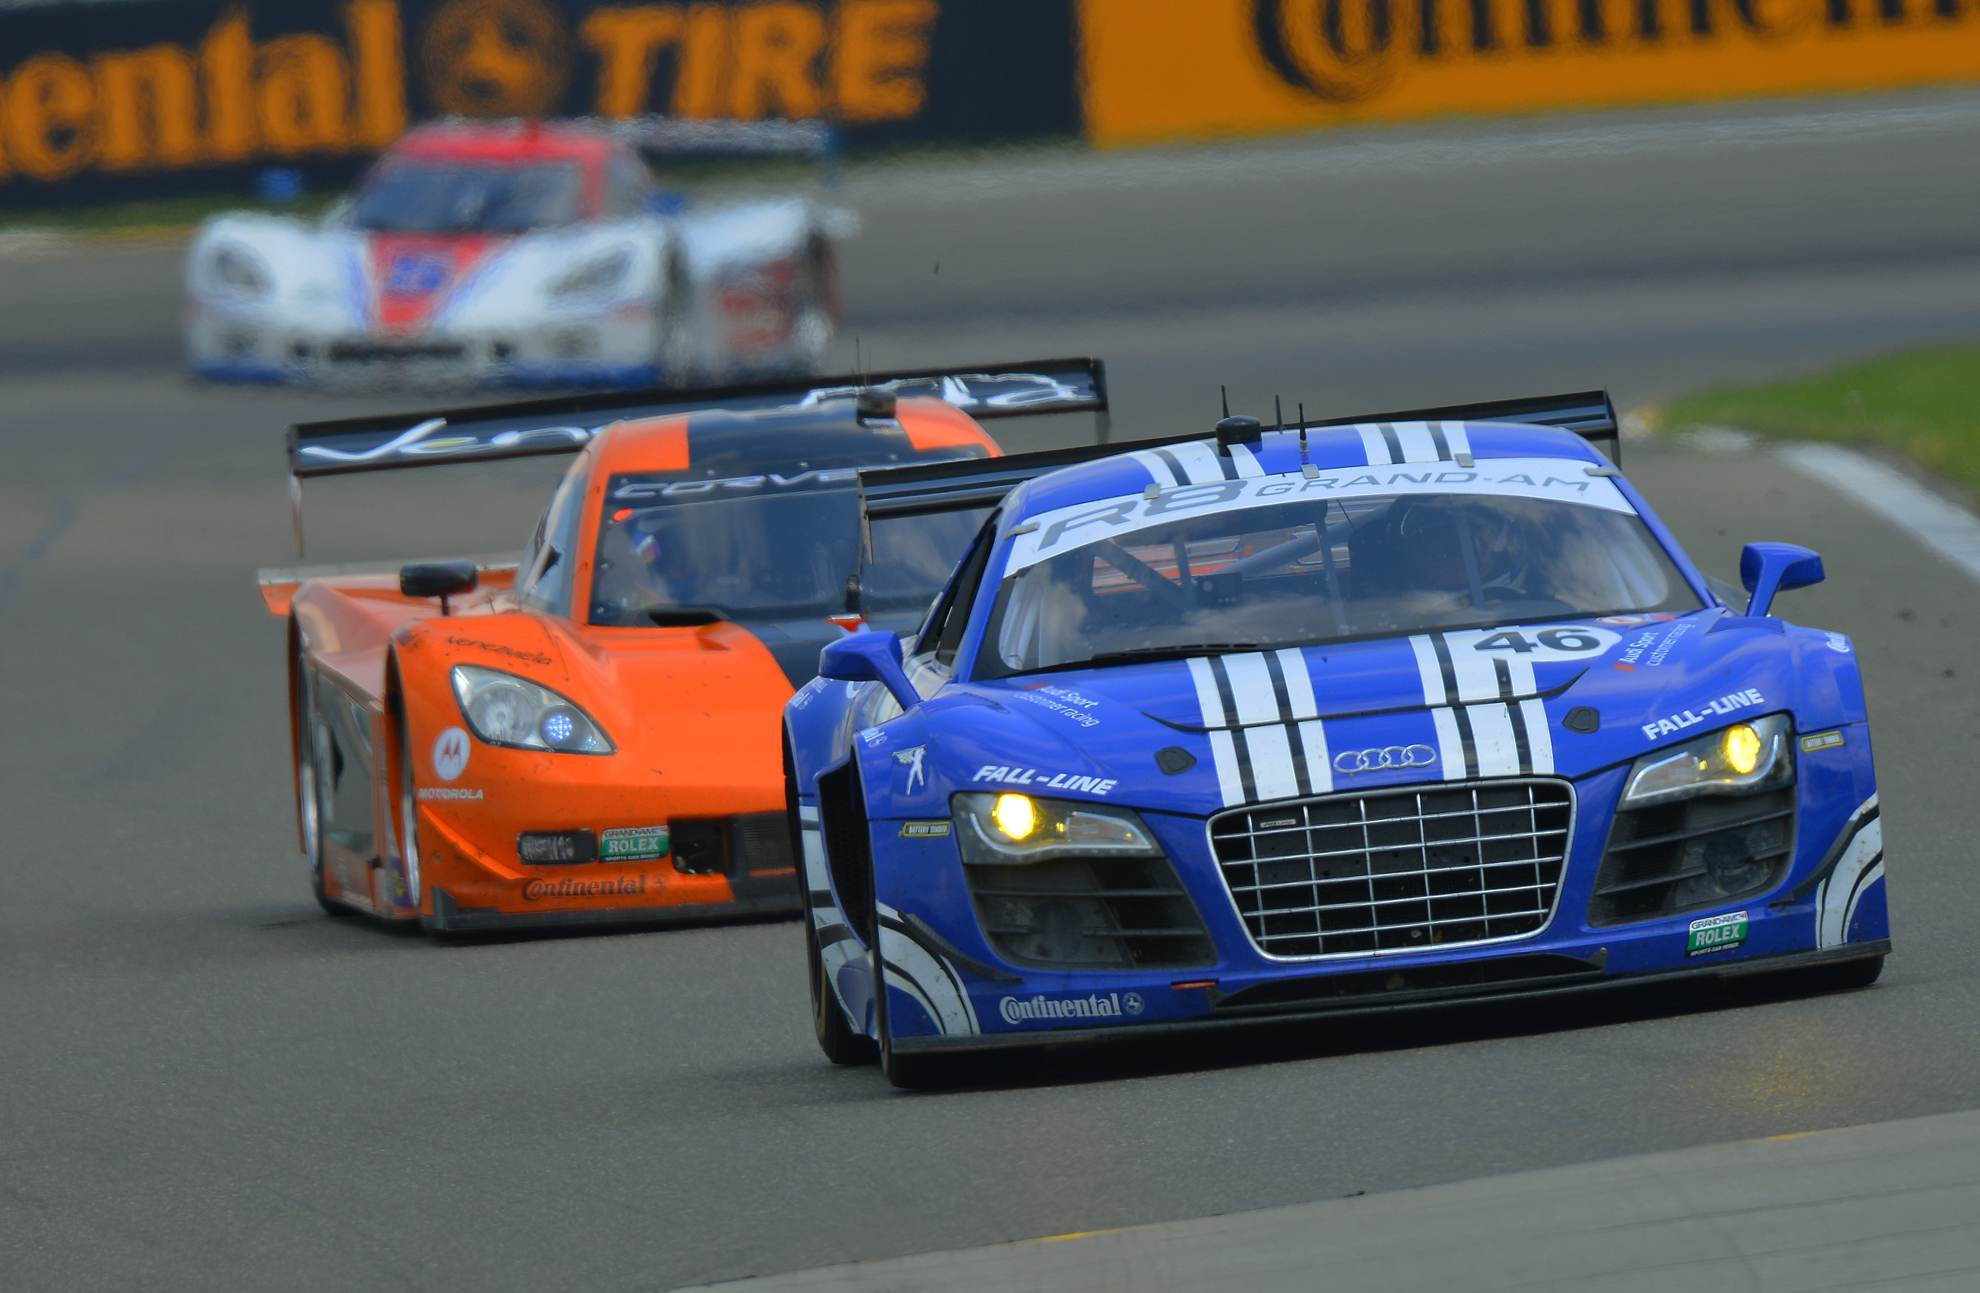 Two Audi R8 GRAND-AM race cars to contest at world famous Indianapolis Motors Speedway